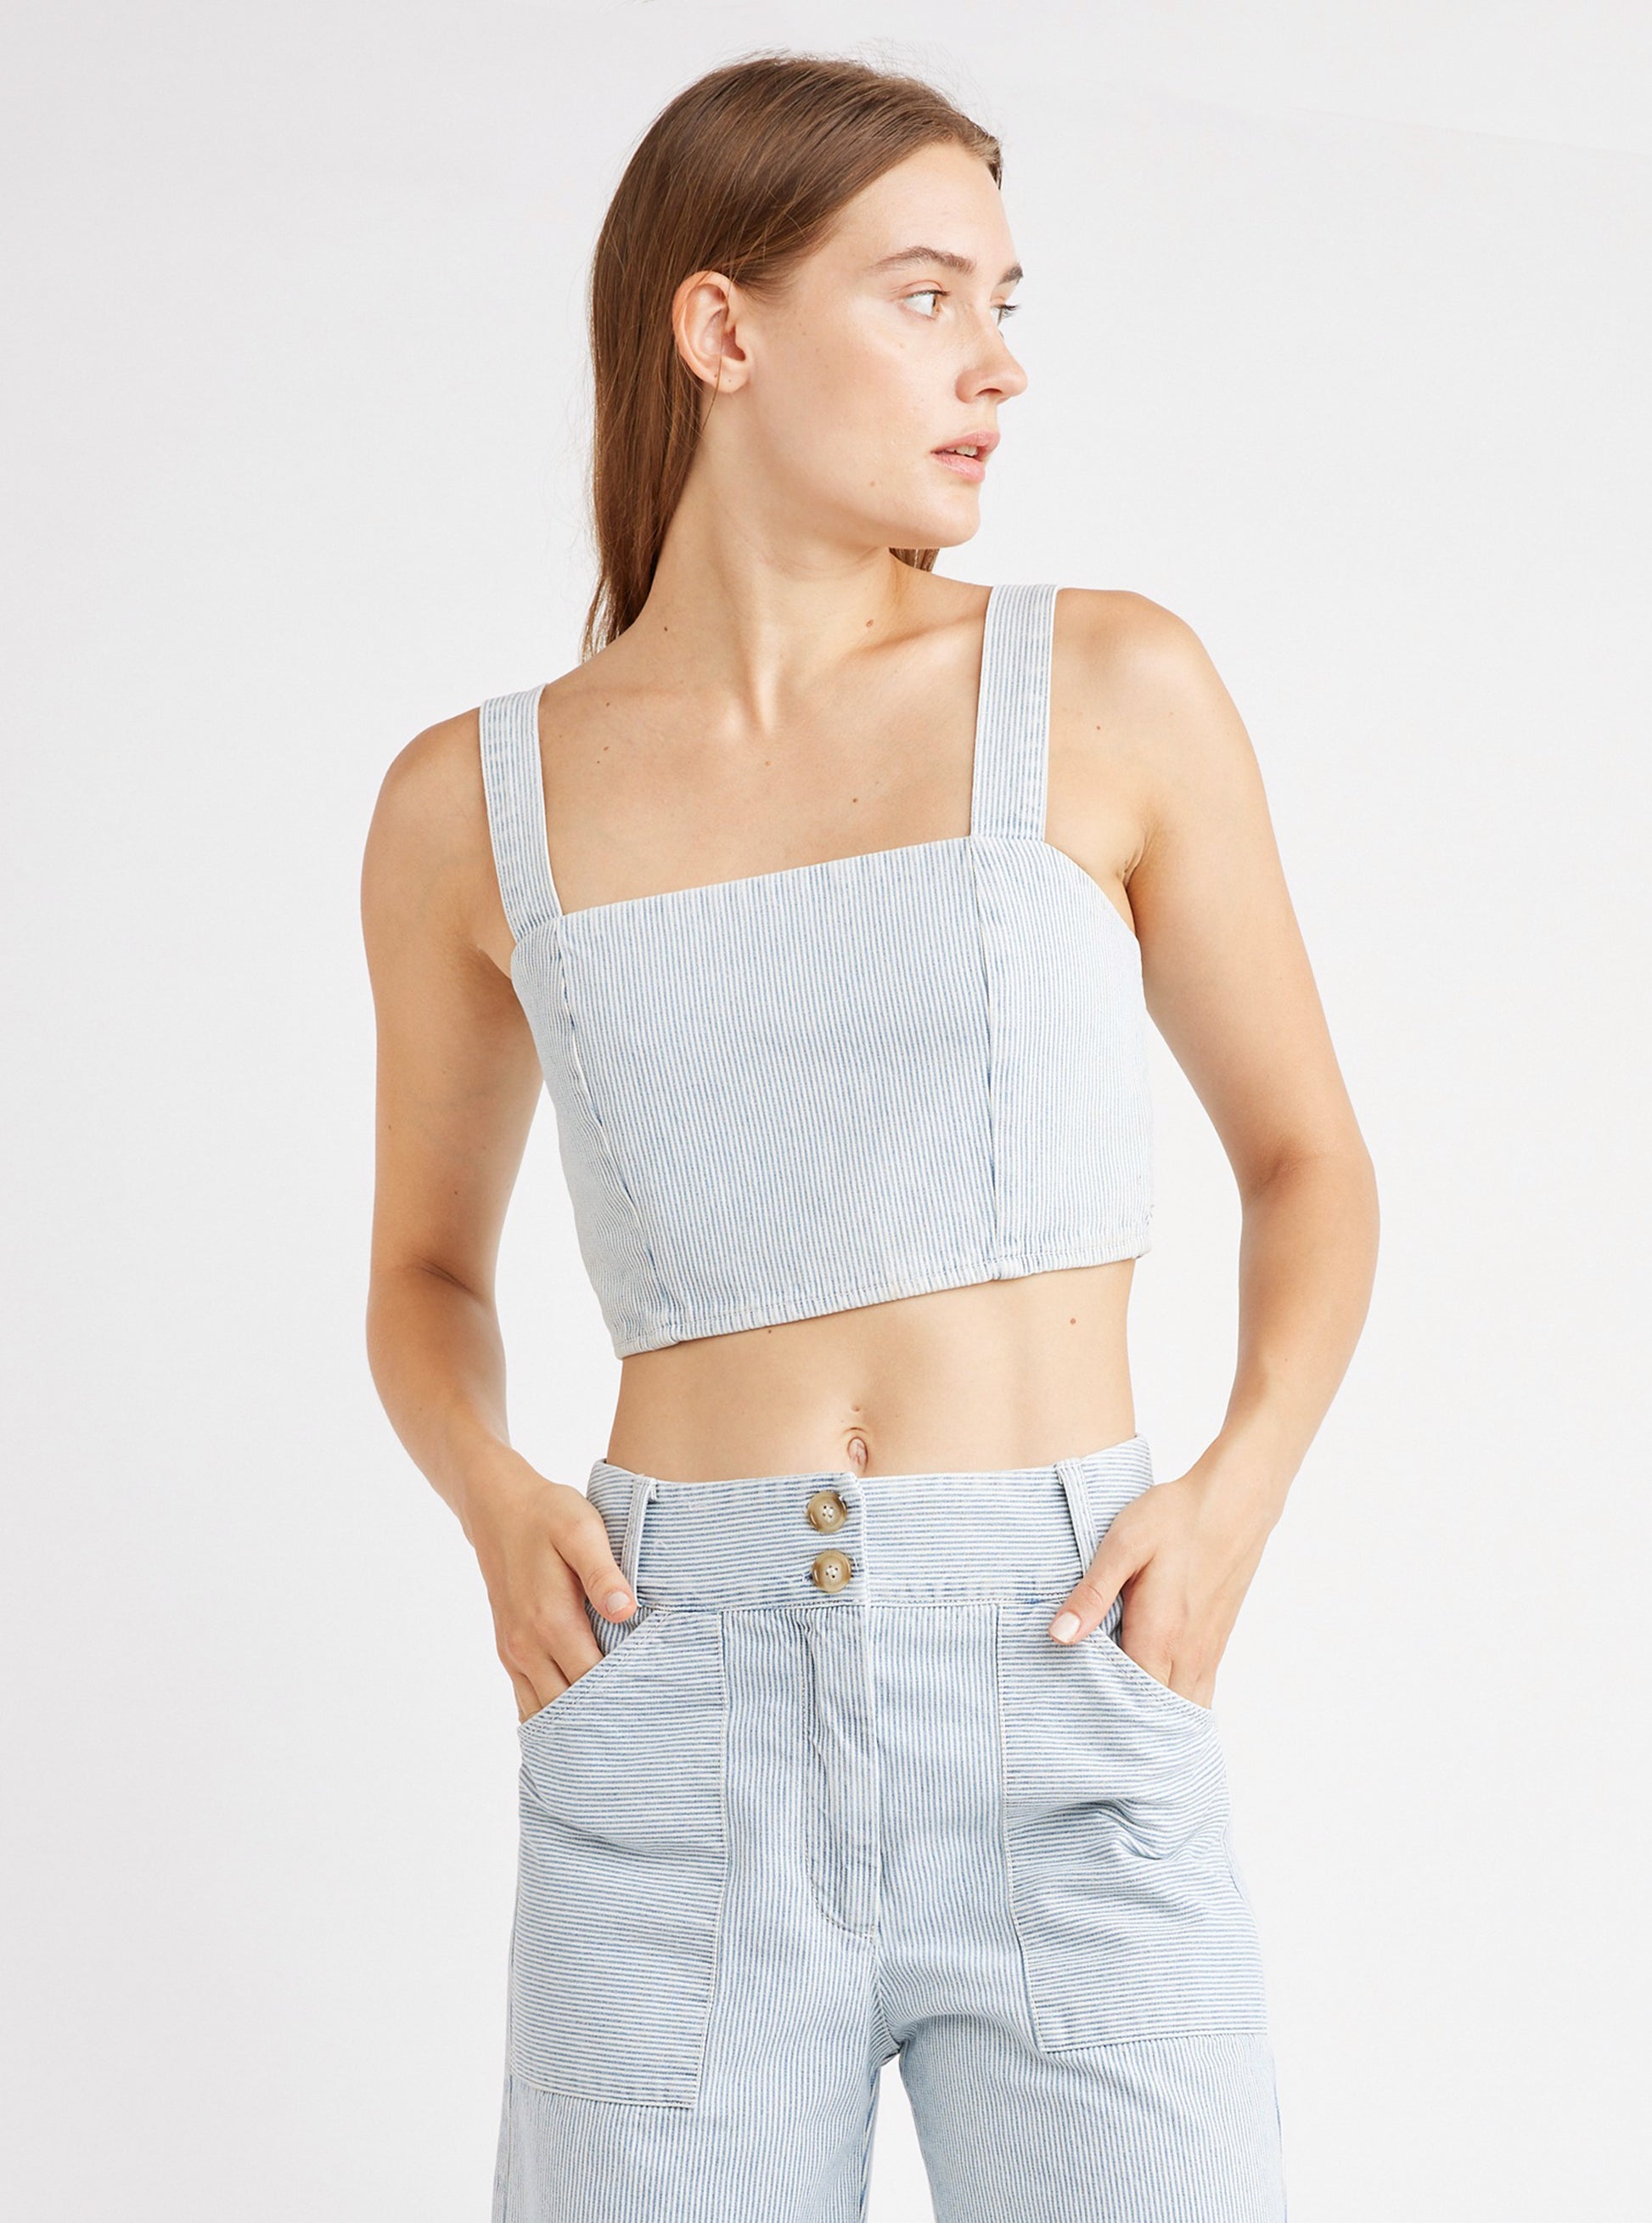 A woman wearing a square neck crop top with small blue and white pinstripe pattern.